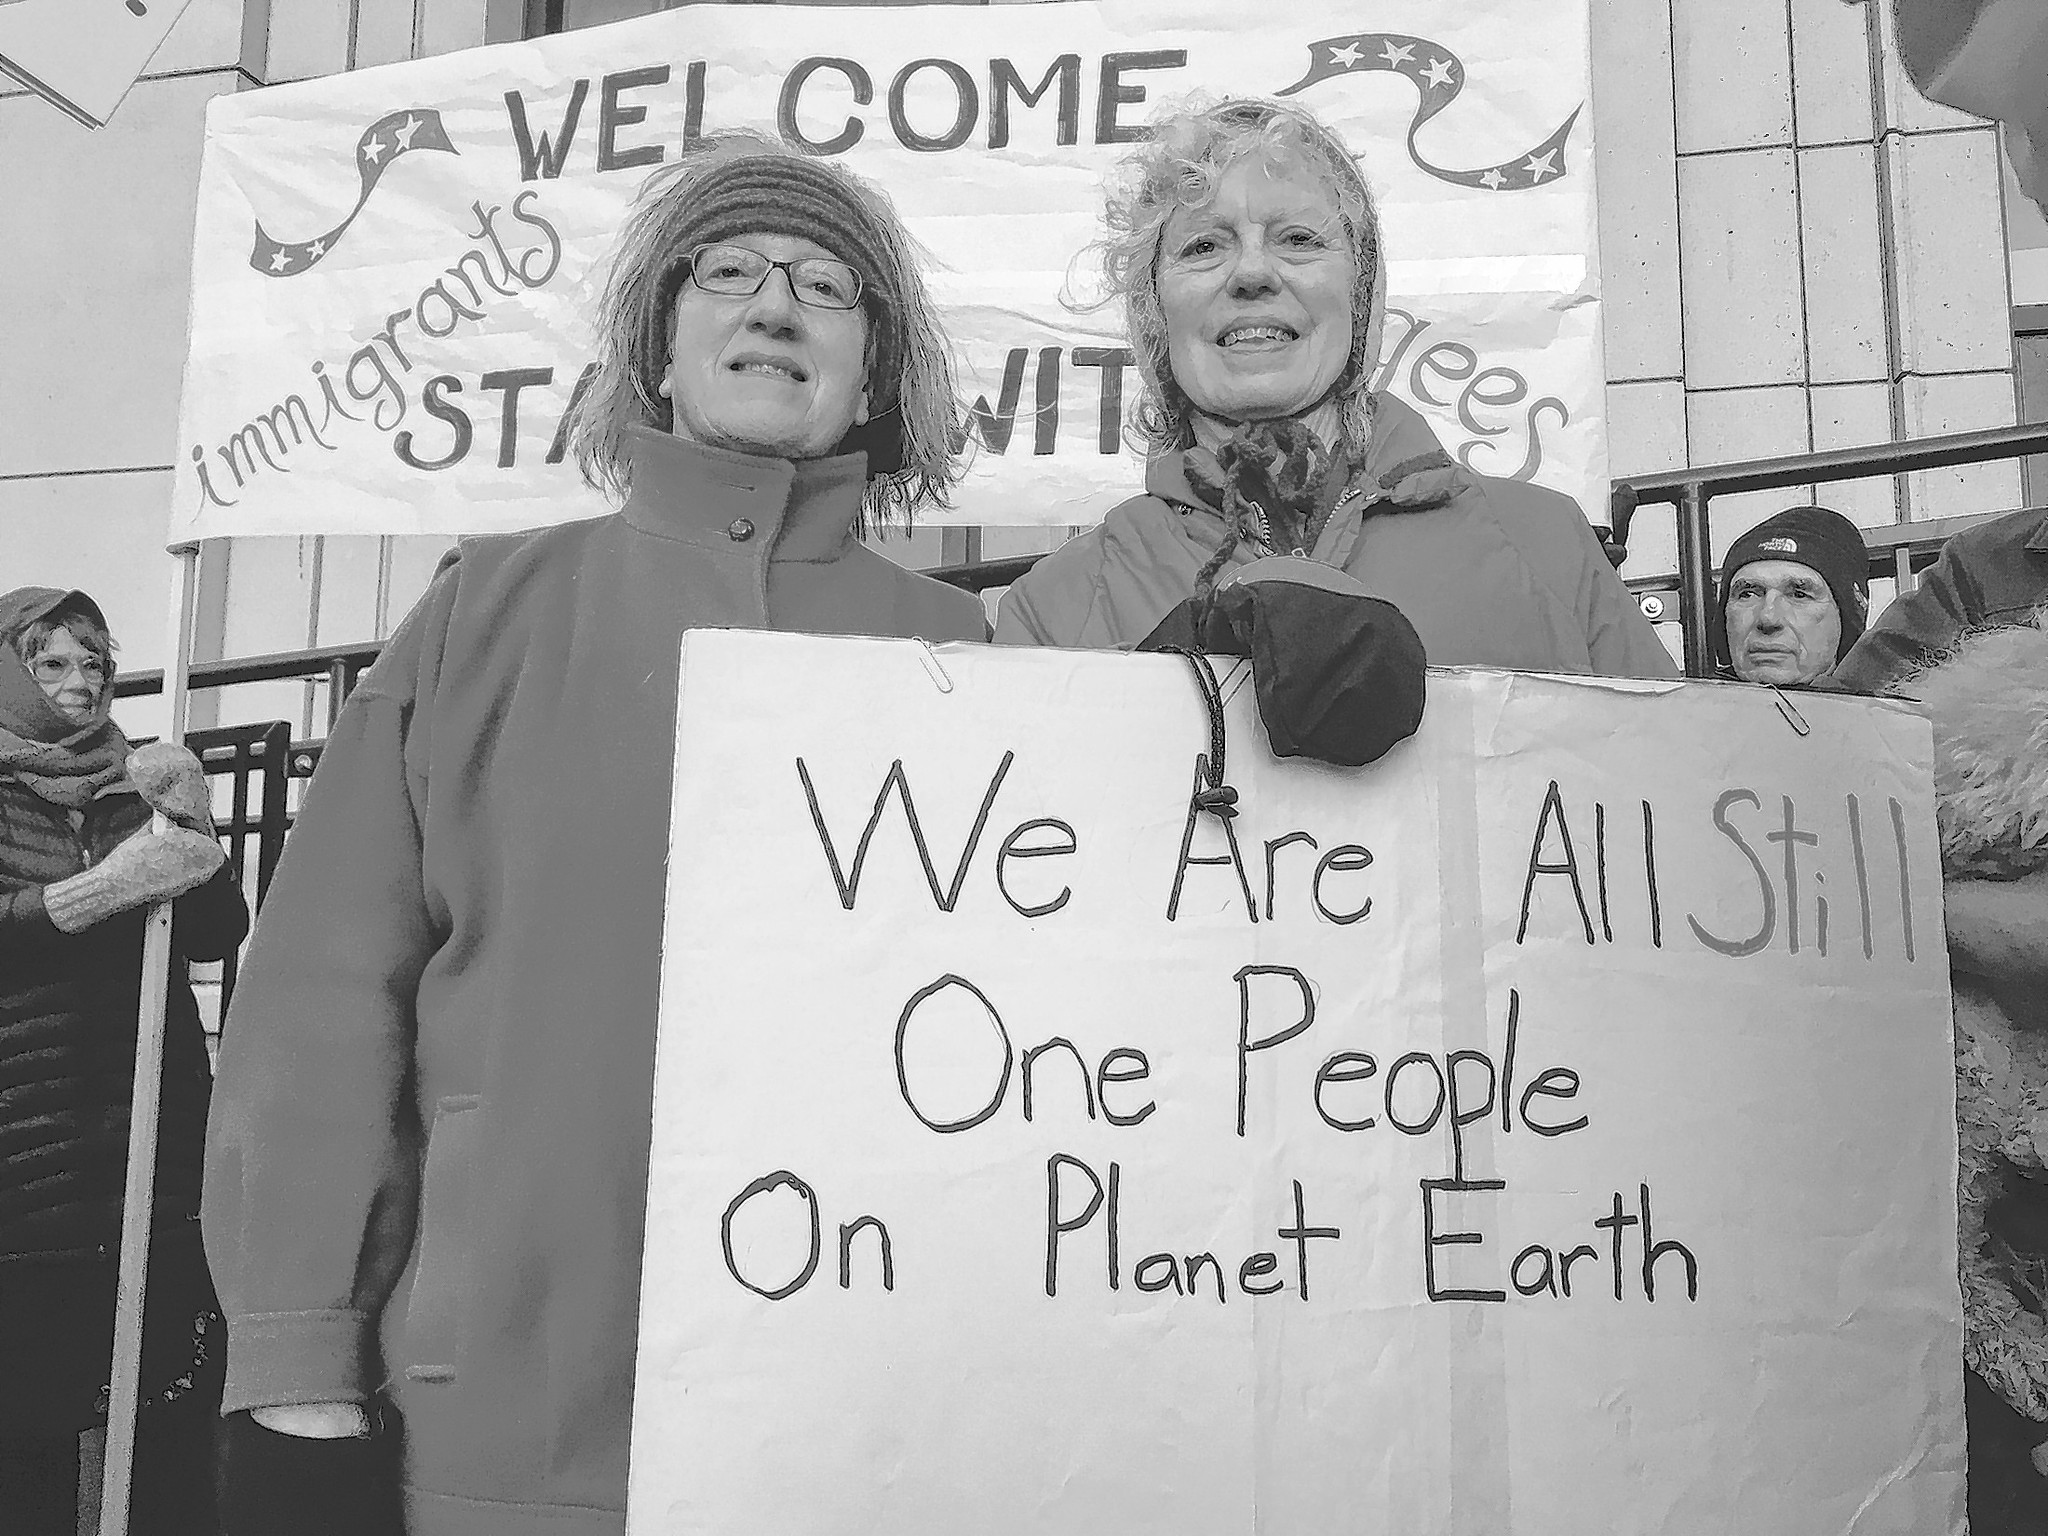 From left, Cathy Botelho and Judith Maier at the “Stand with Refugees and Immigrants” event Monday, Feb. 6. This was the second gathering organized for 7 - 8:30 a.m. Monday morning in front of the Capitol, aimed both at showing support for refugees and immigrants and thanking Alaskan legislators who have spoken out against President Donald Trump’s executive order. (Mary Catharine Martin | Capital City Weekly)